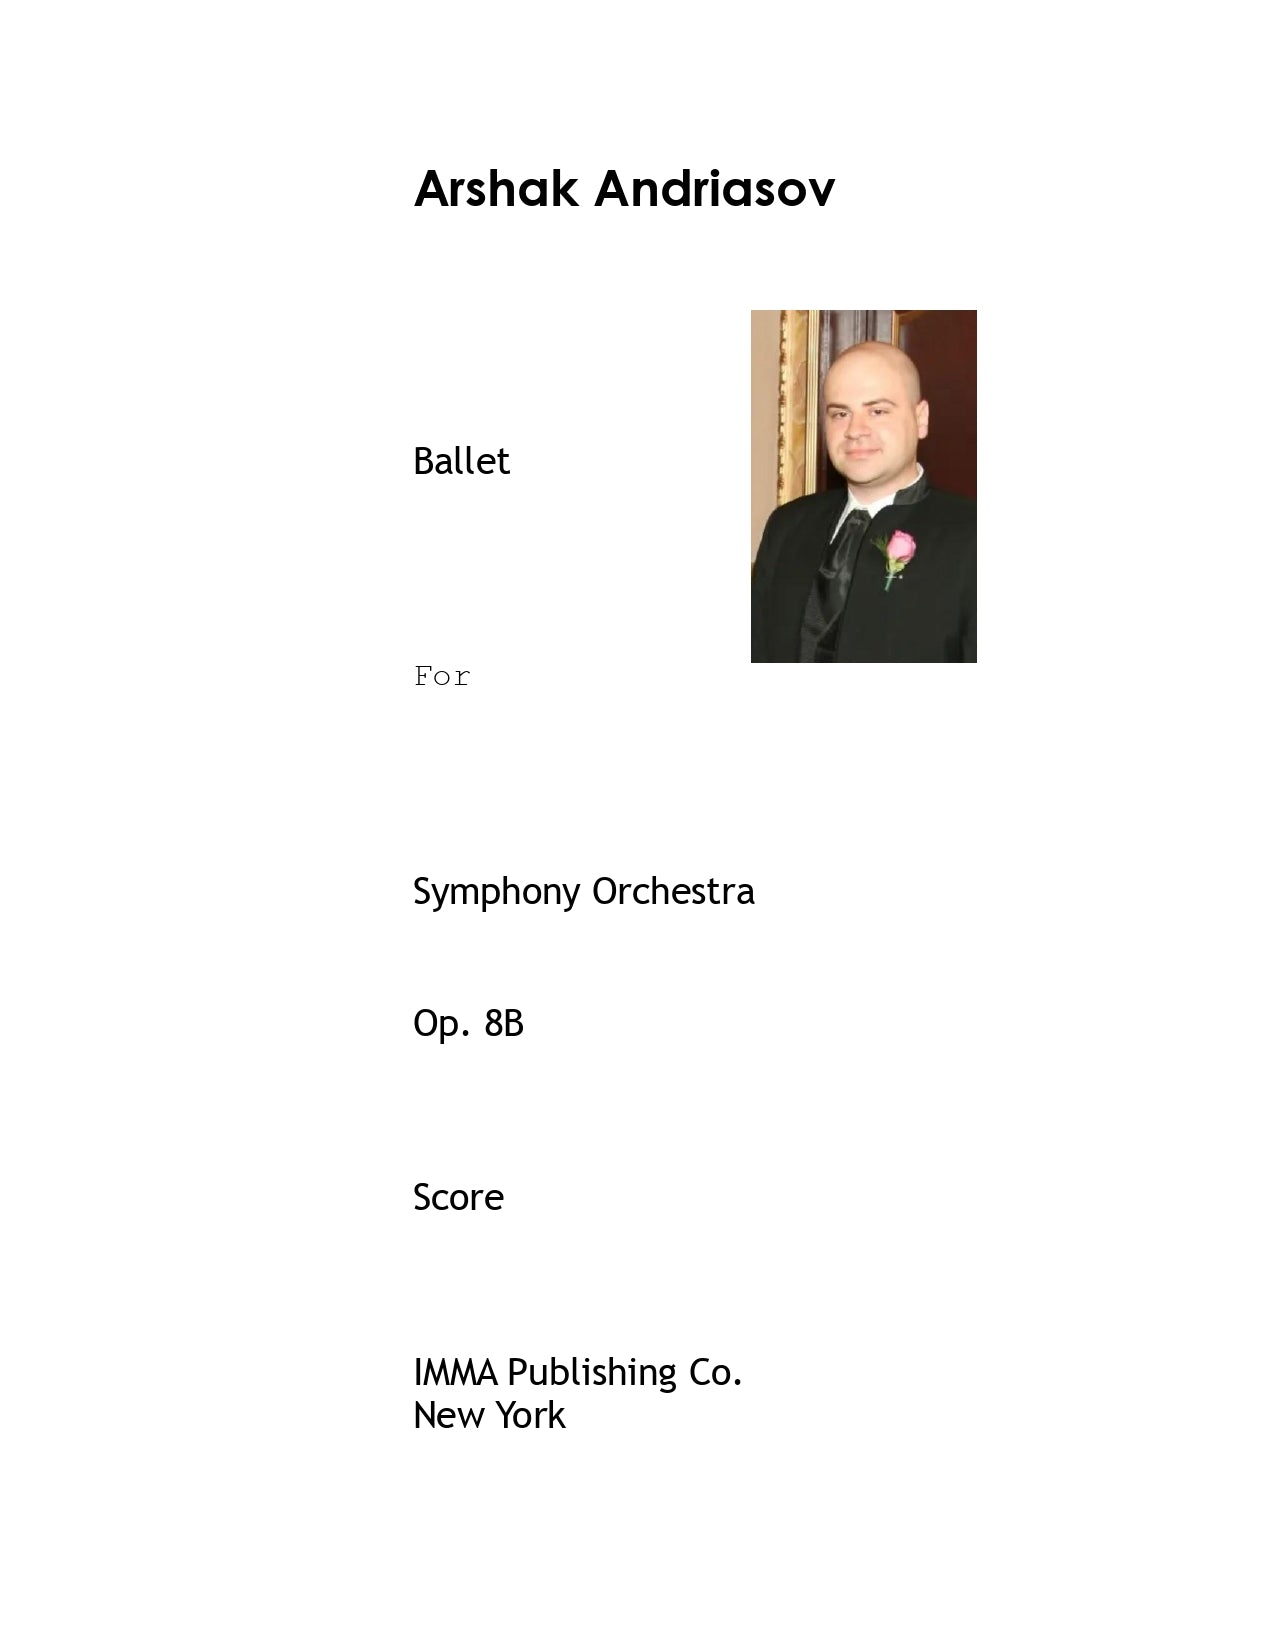 099. Arshak Andriasov: Ballet, Op. 8B for Symphony Orchestra (PDF)